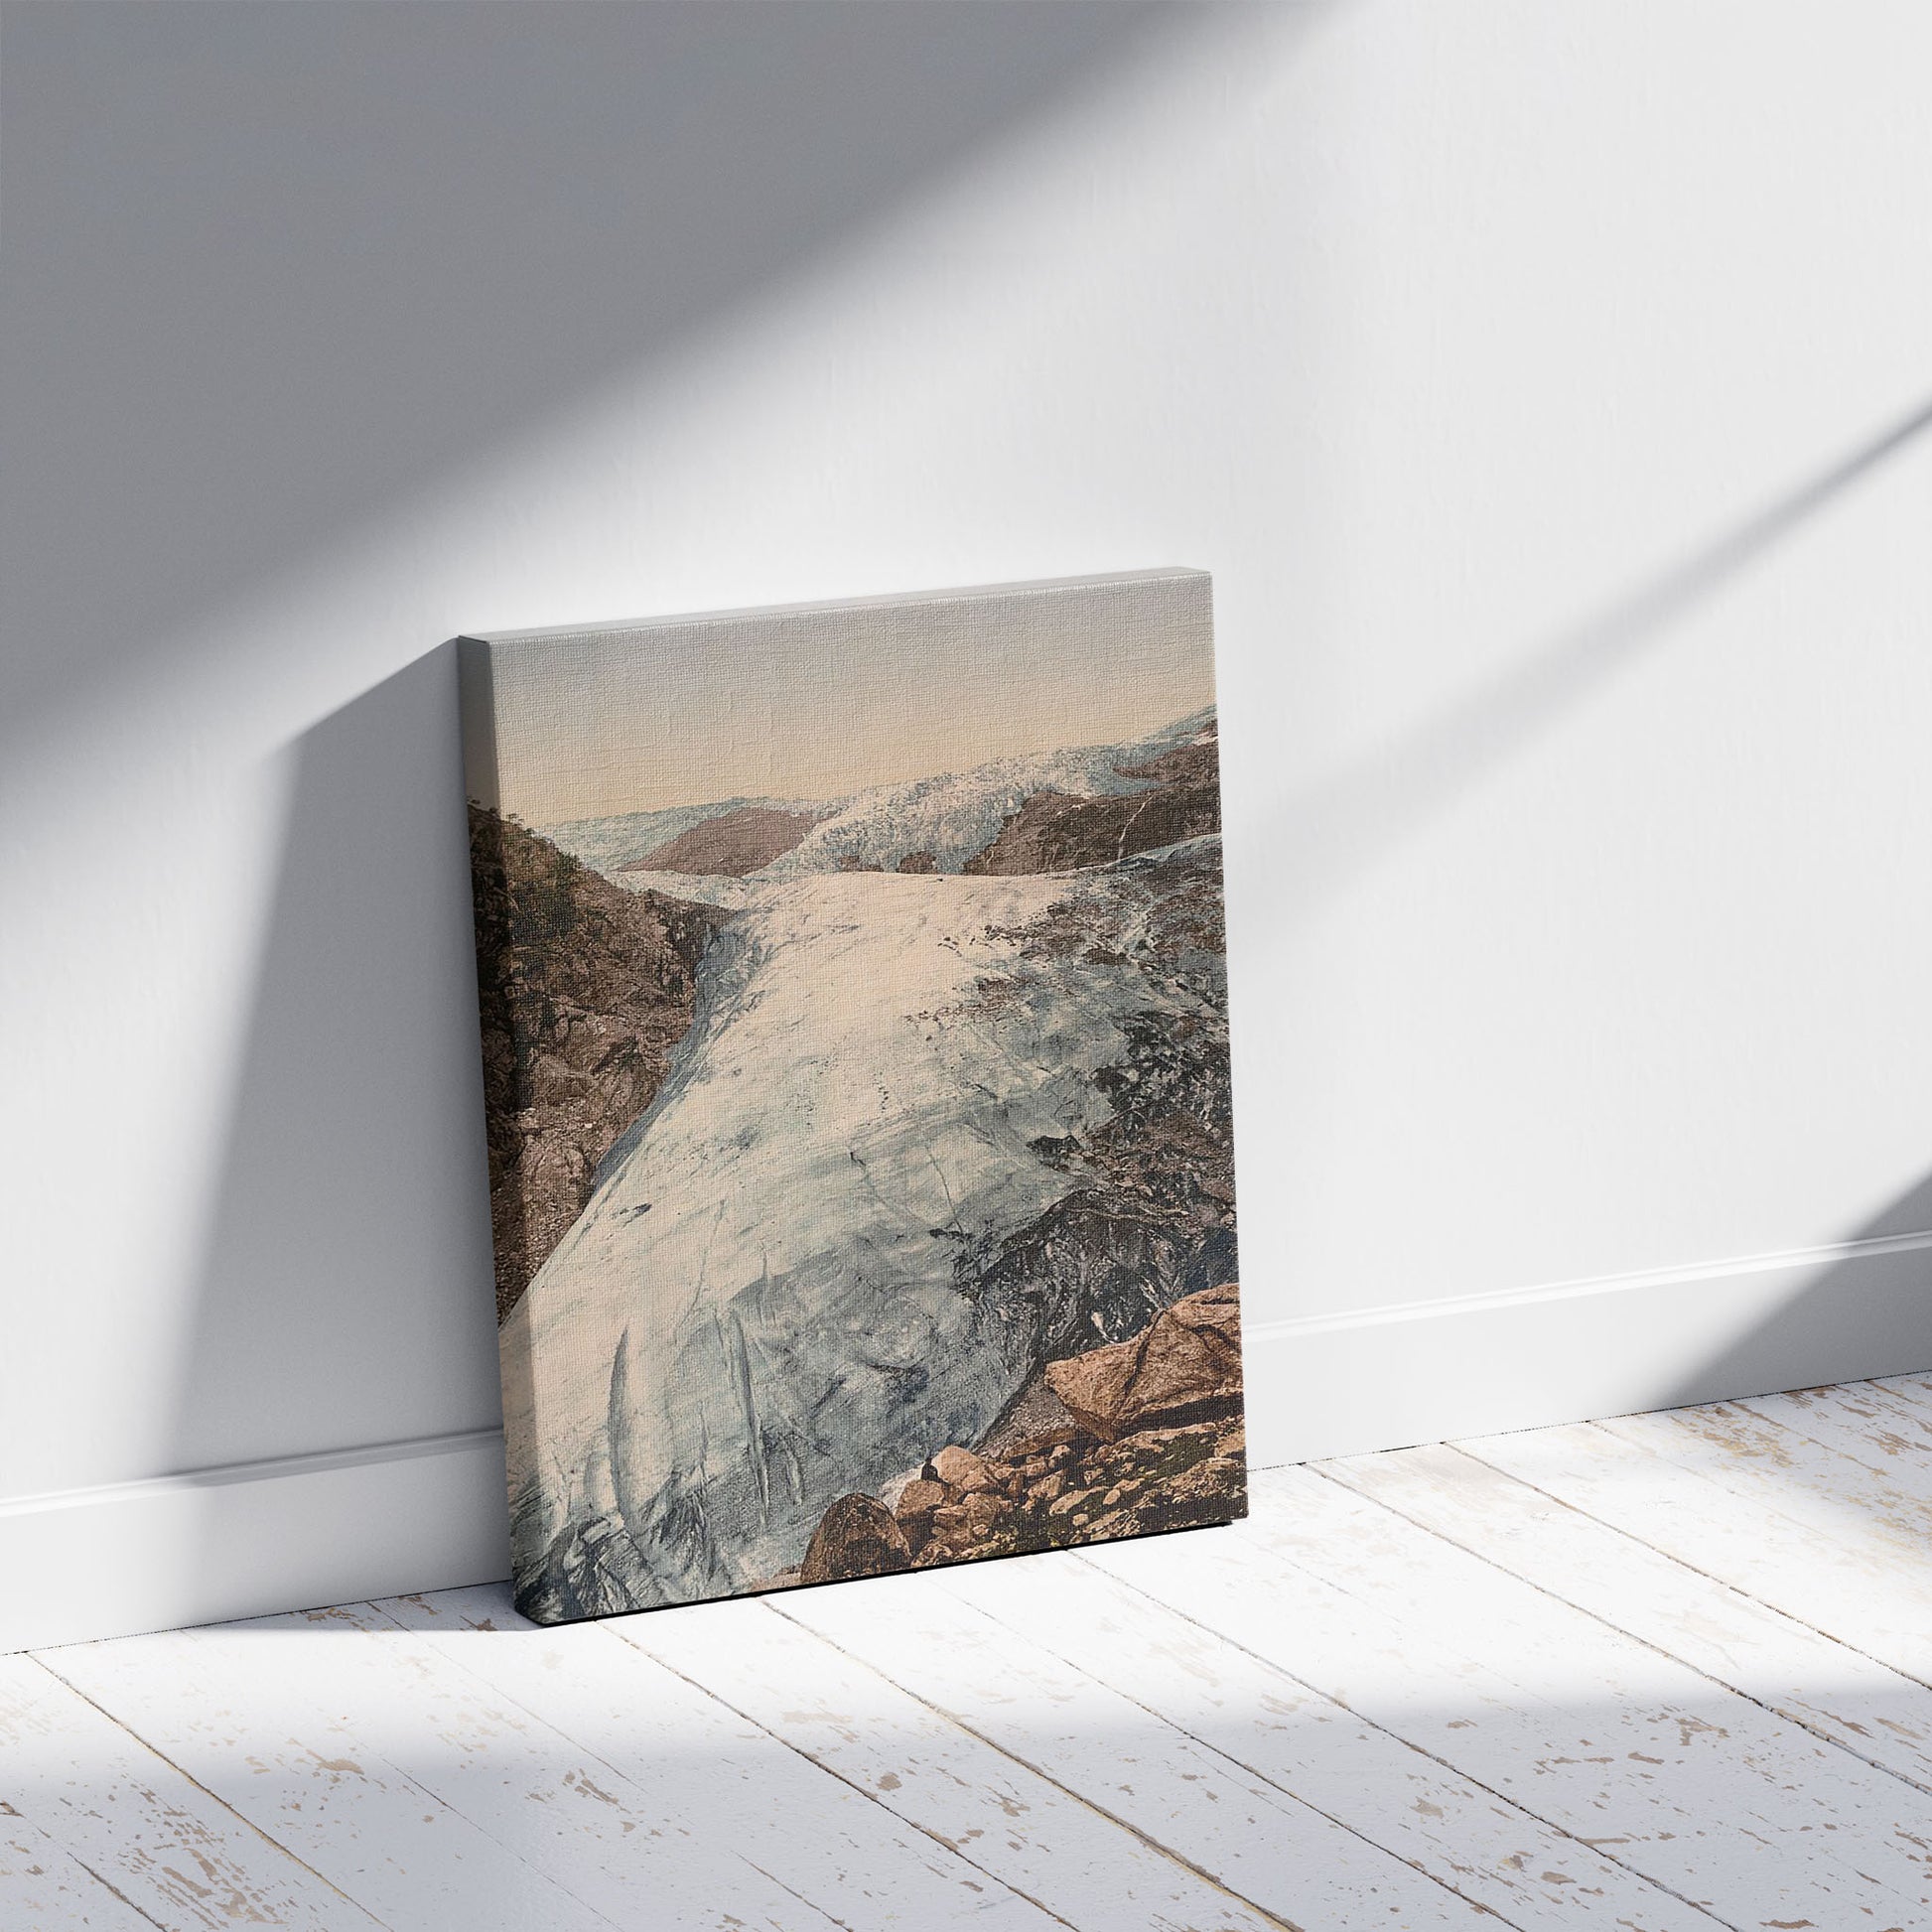 A picture of Buerbrae (i.e., Buarbreen) Glacier, Odde (i.e. Odda), Hardanger Fjord, Norway, a mockup of the print leaning against a wall